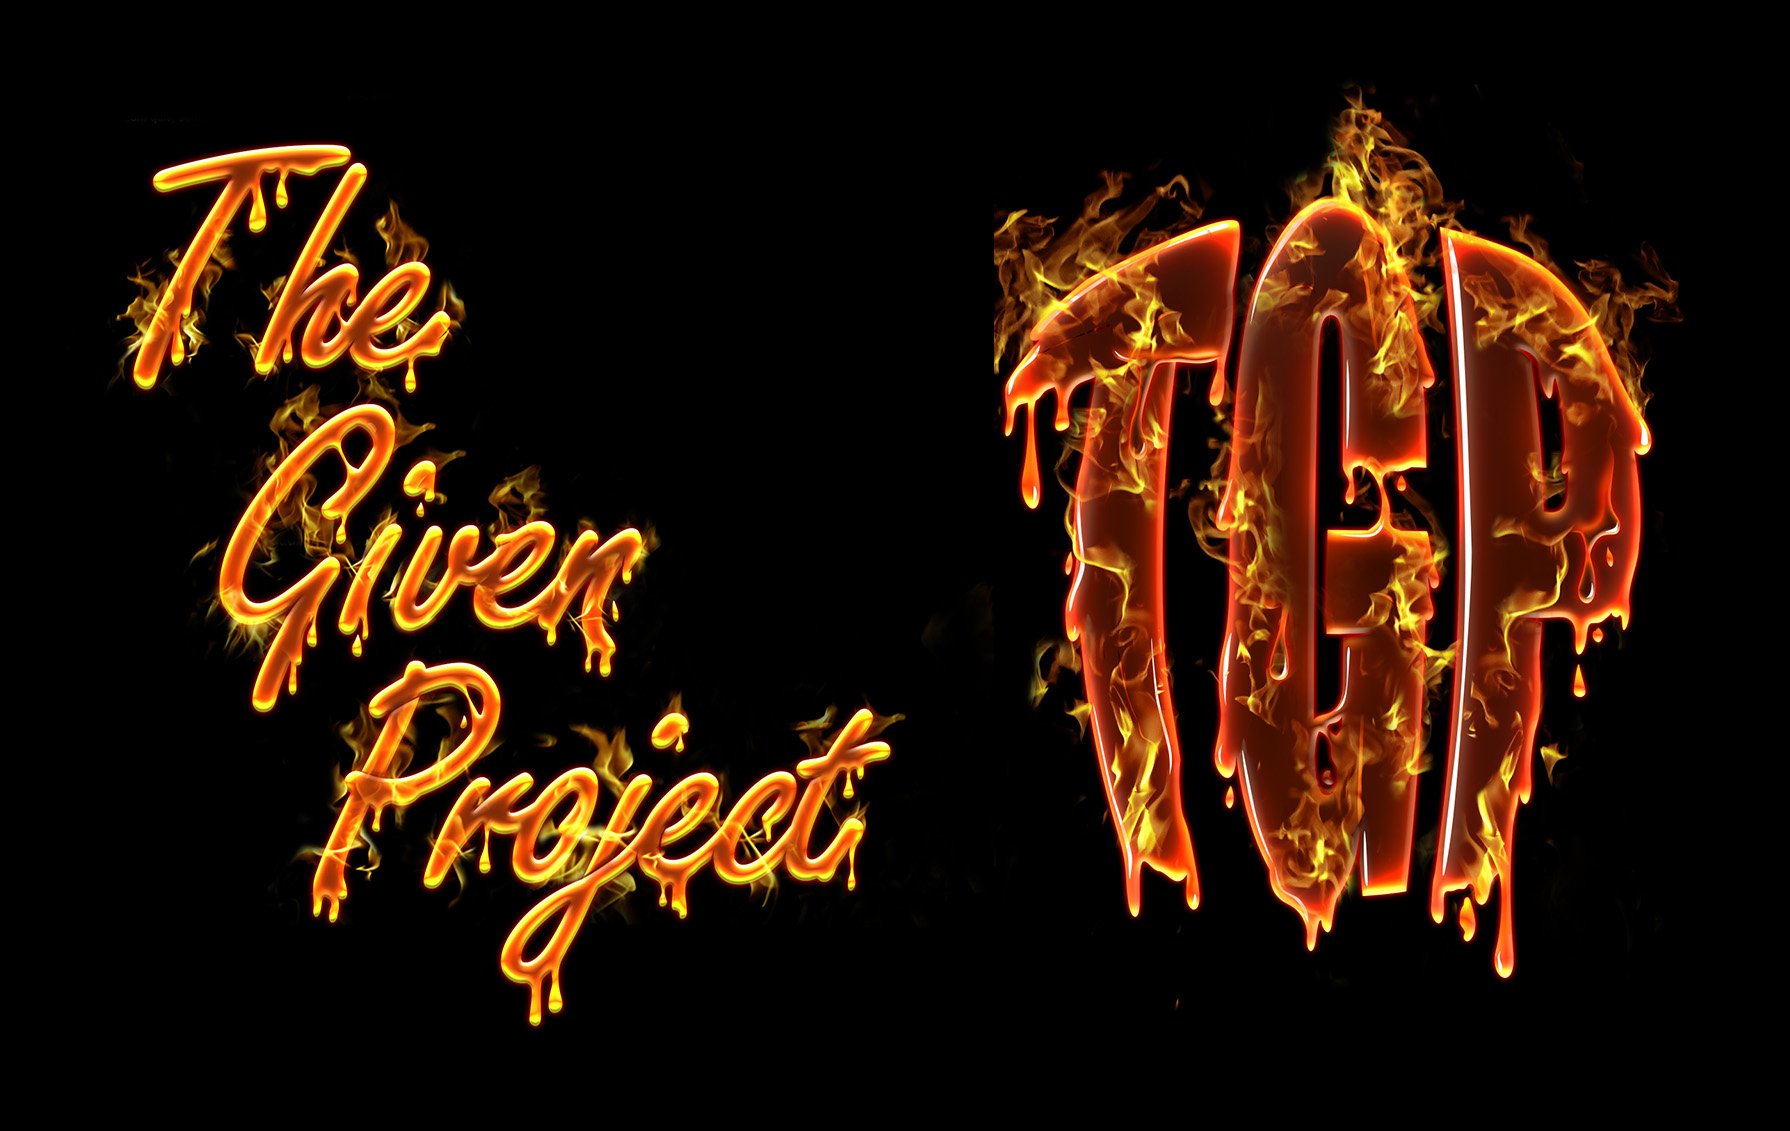 the-given-project-logo.jpg